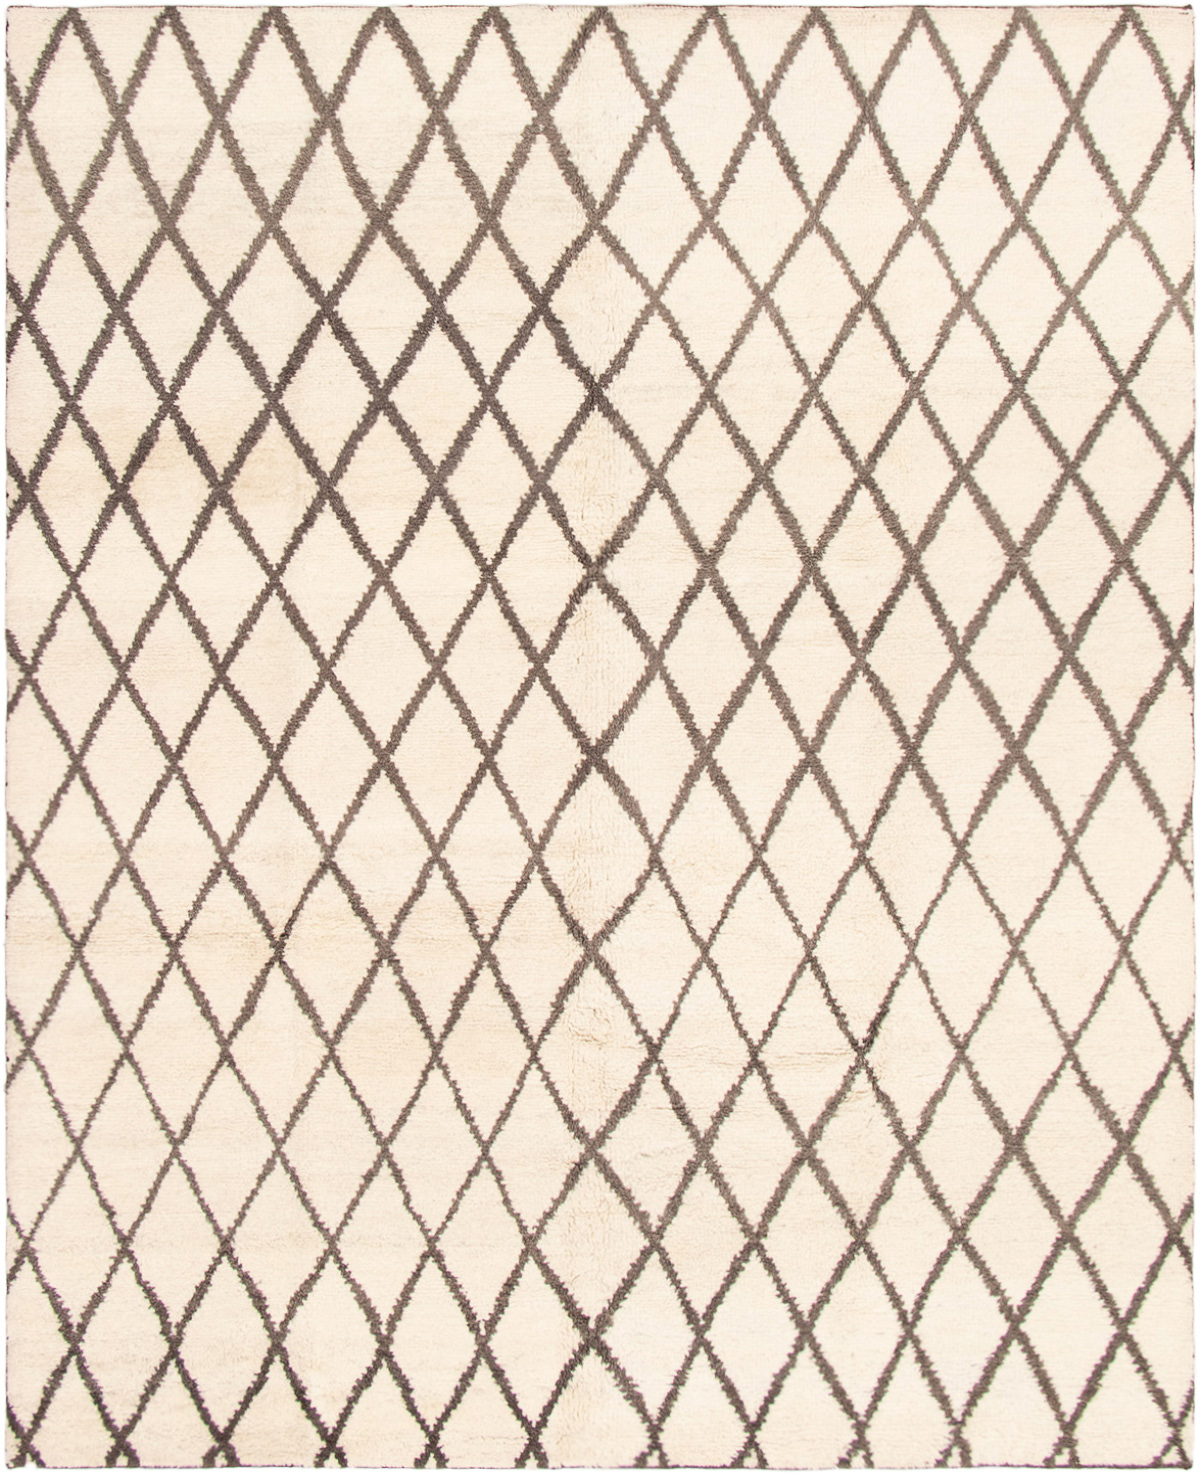 Hand-knotted Arlequin Cream Wool Rug 7'10" x 9'9" Size: 7'10" x 9'9"  